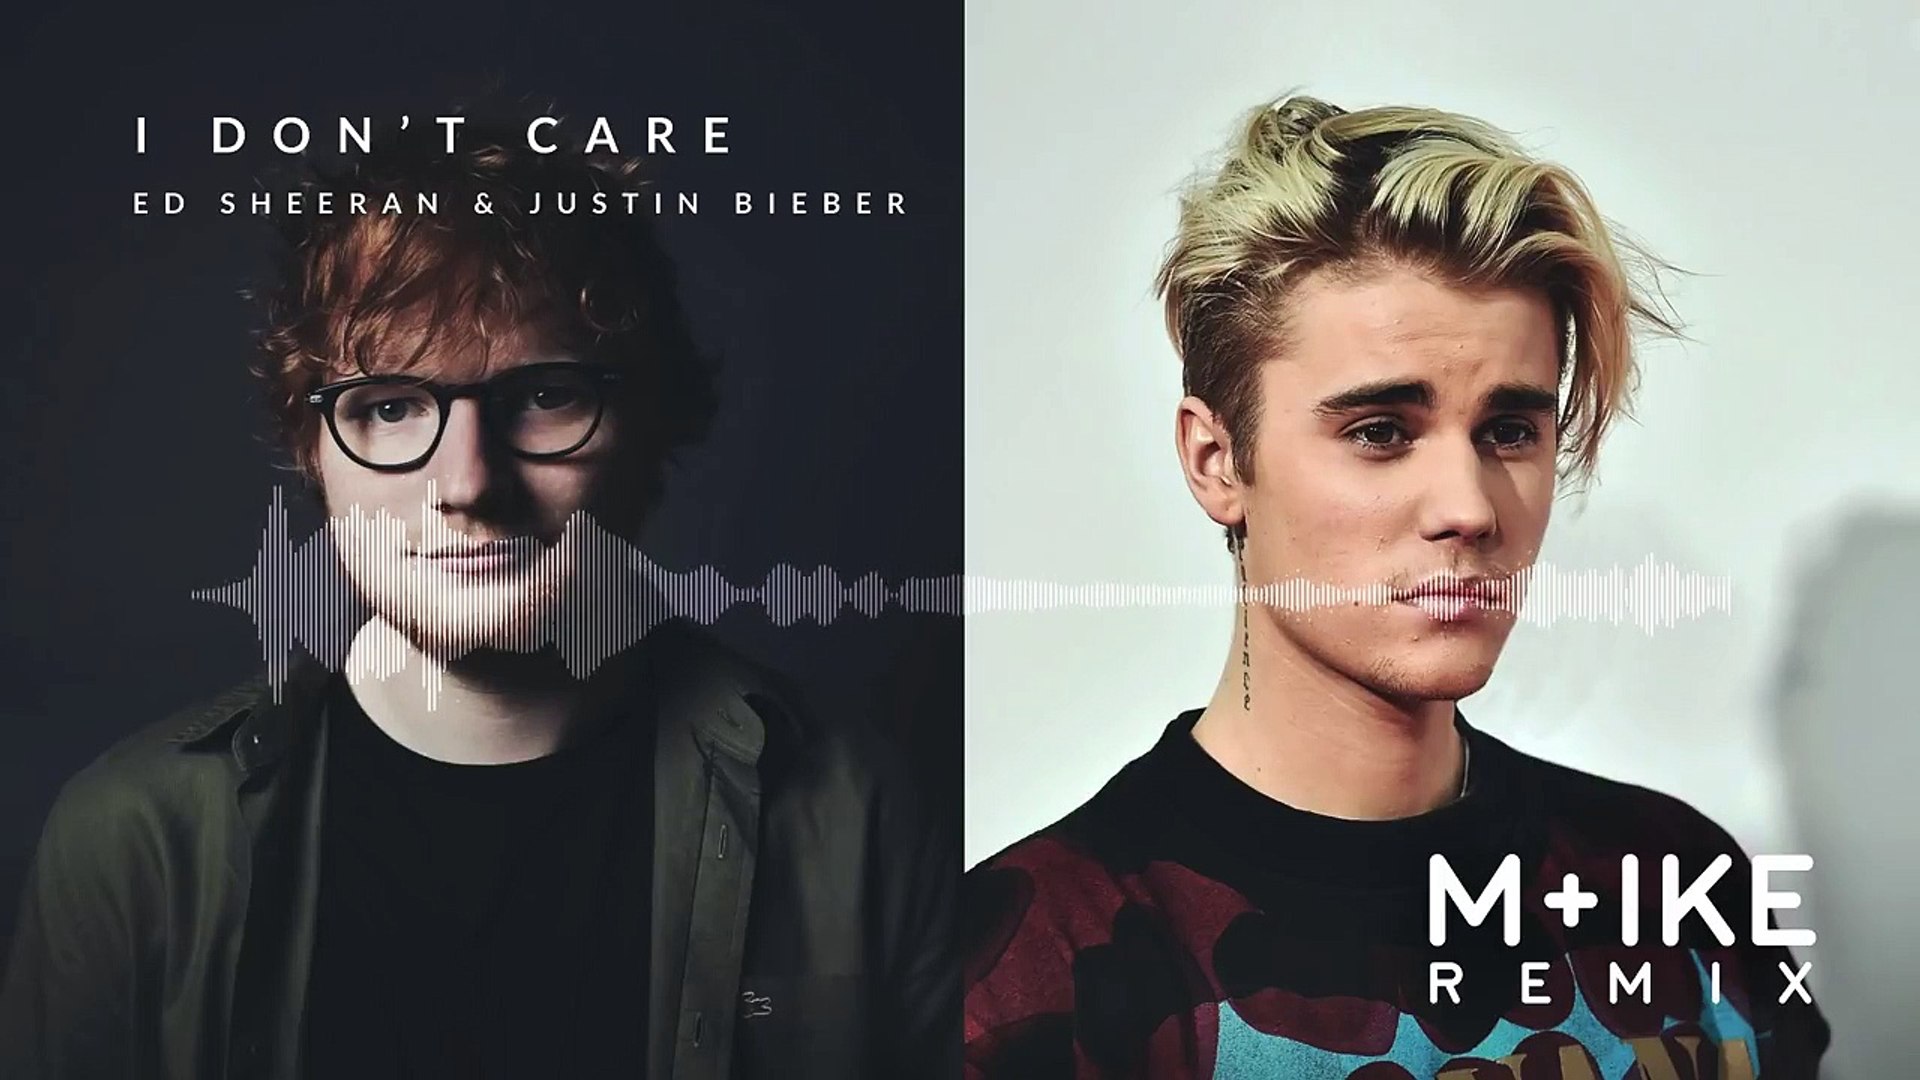 Ed Sheeran & Justin Bieber - I Don't Care official song 2019